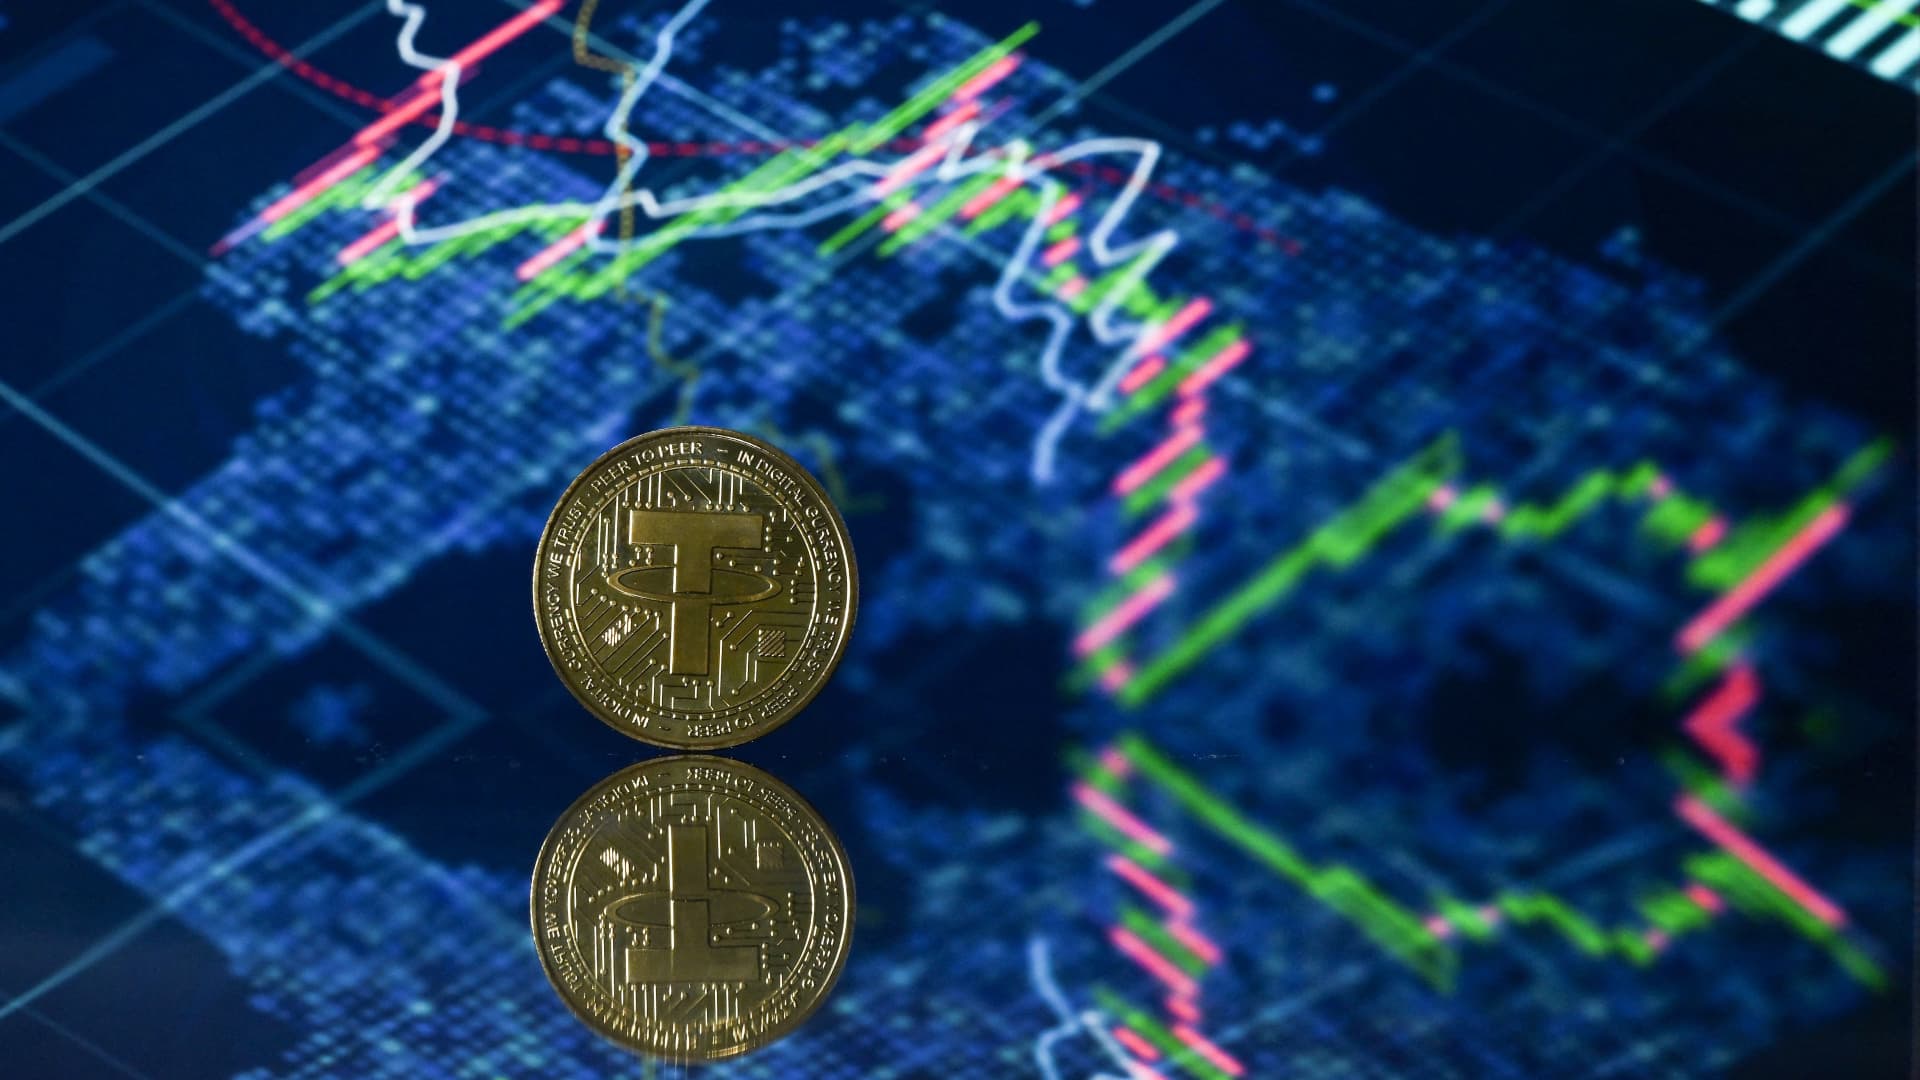 Bitcoin price stabilises after crypto markets crumble imran nazir betting